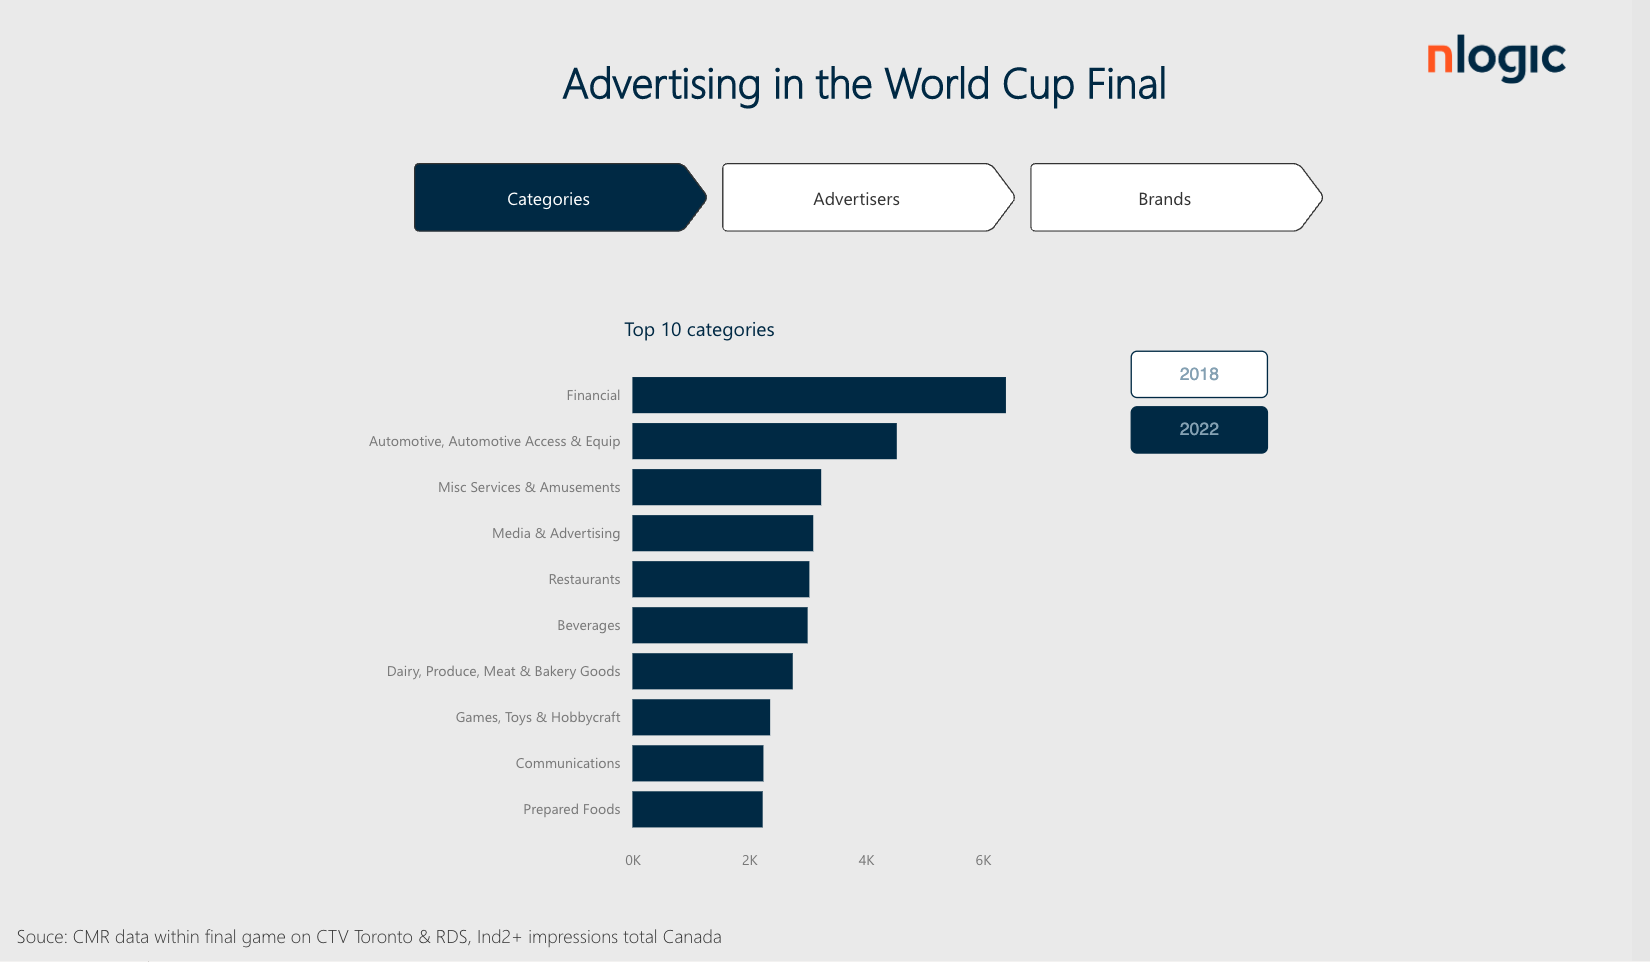  Categories - Advertising World Cup Final 